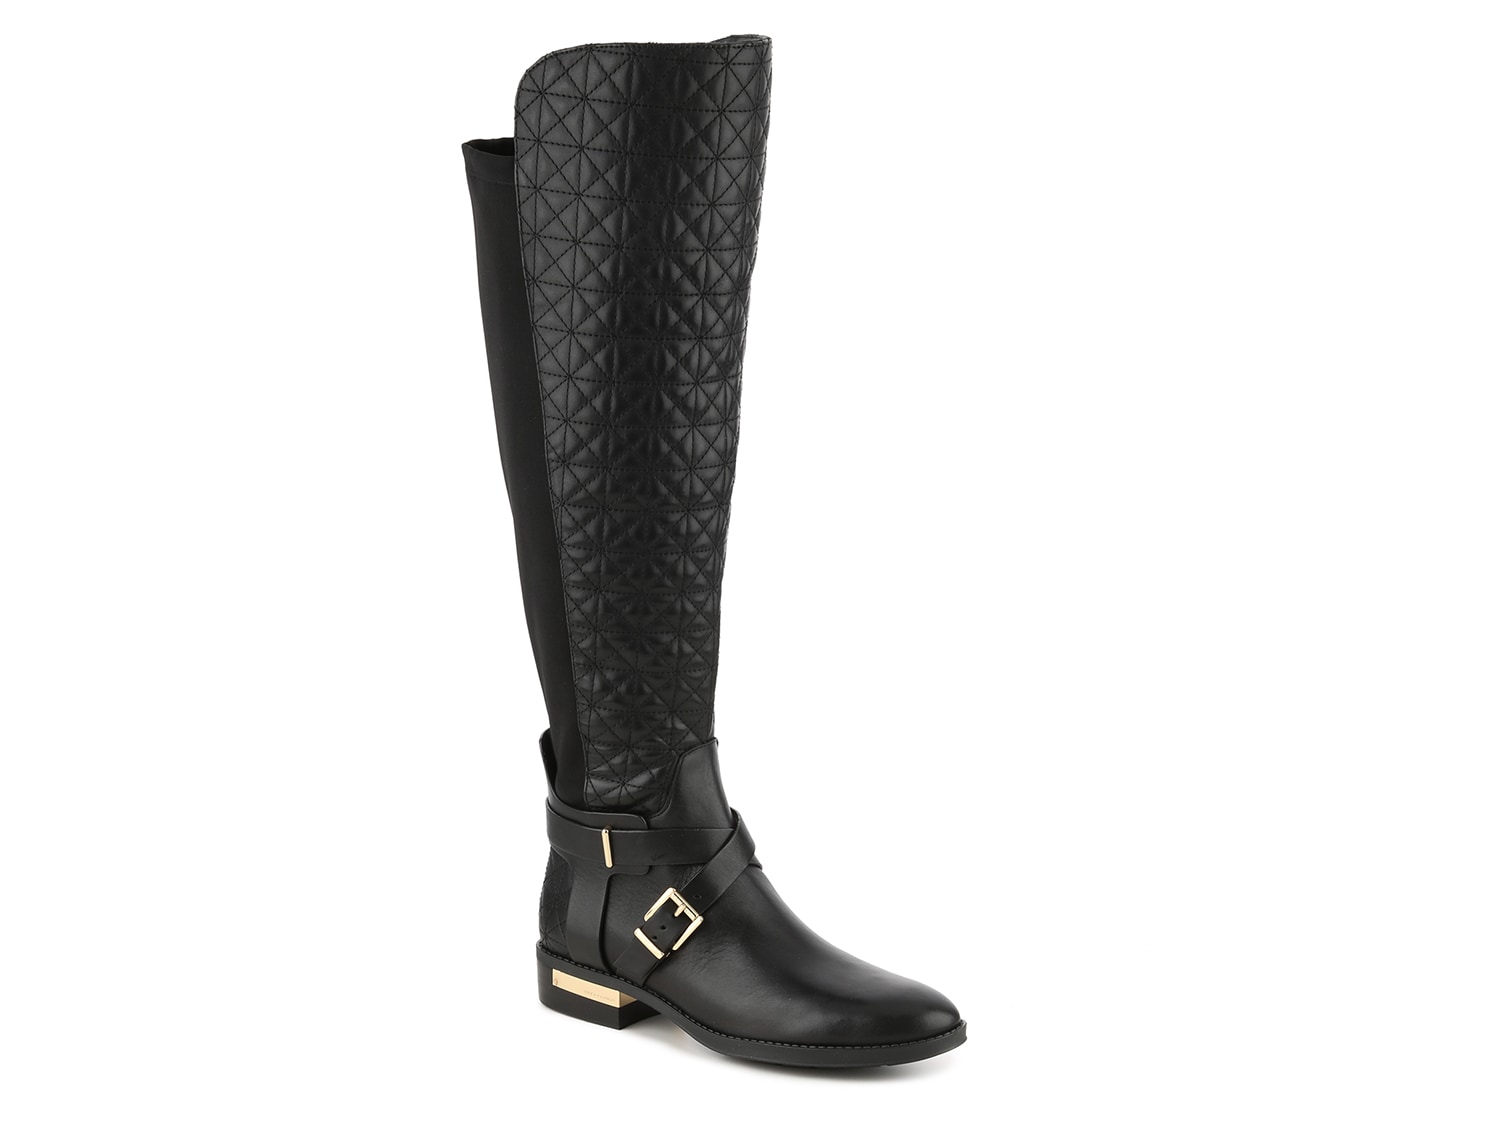 Vince Camuto Patira Over-the-Knee Riding Boot - Free Shipping | DSW